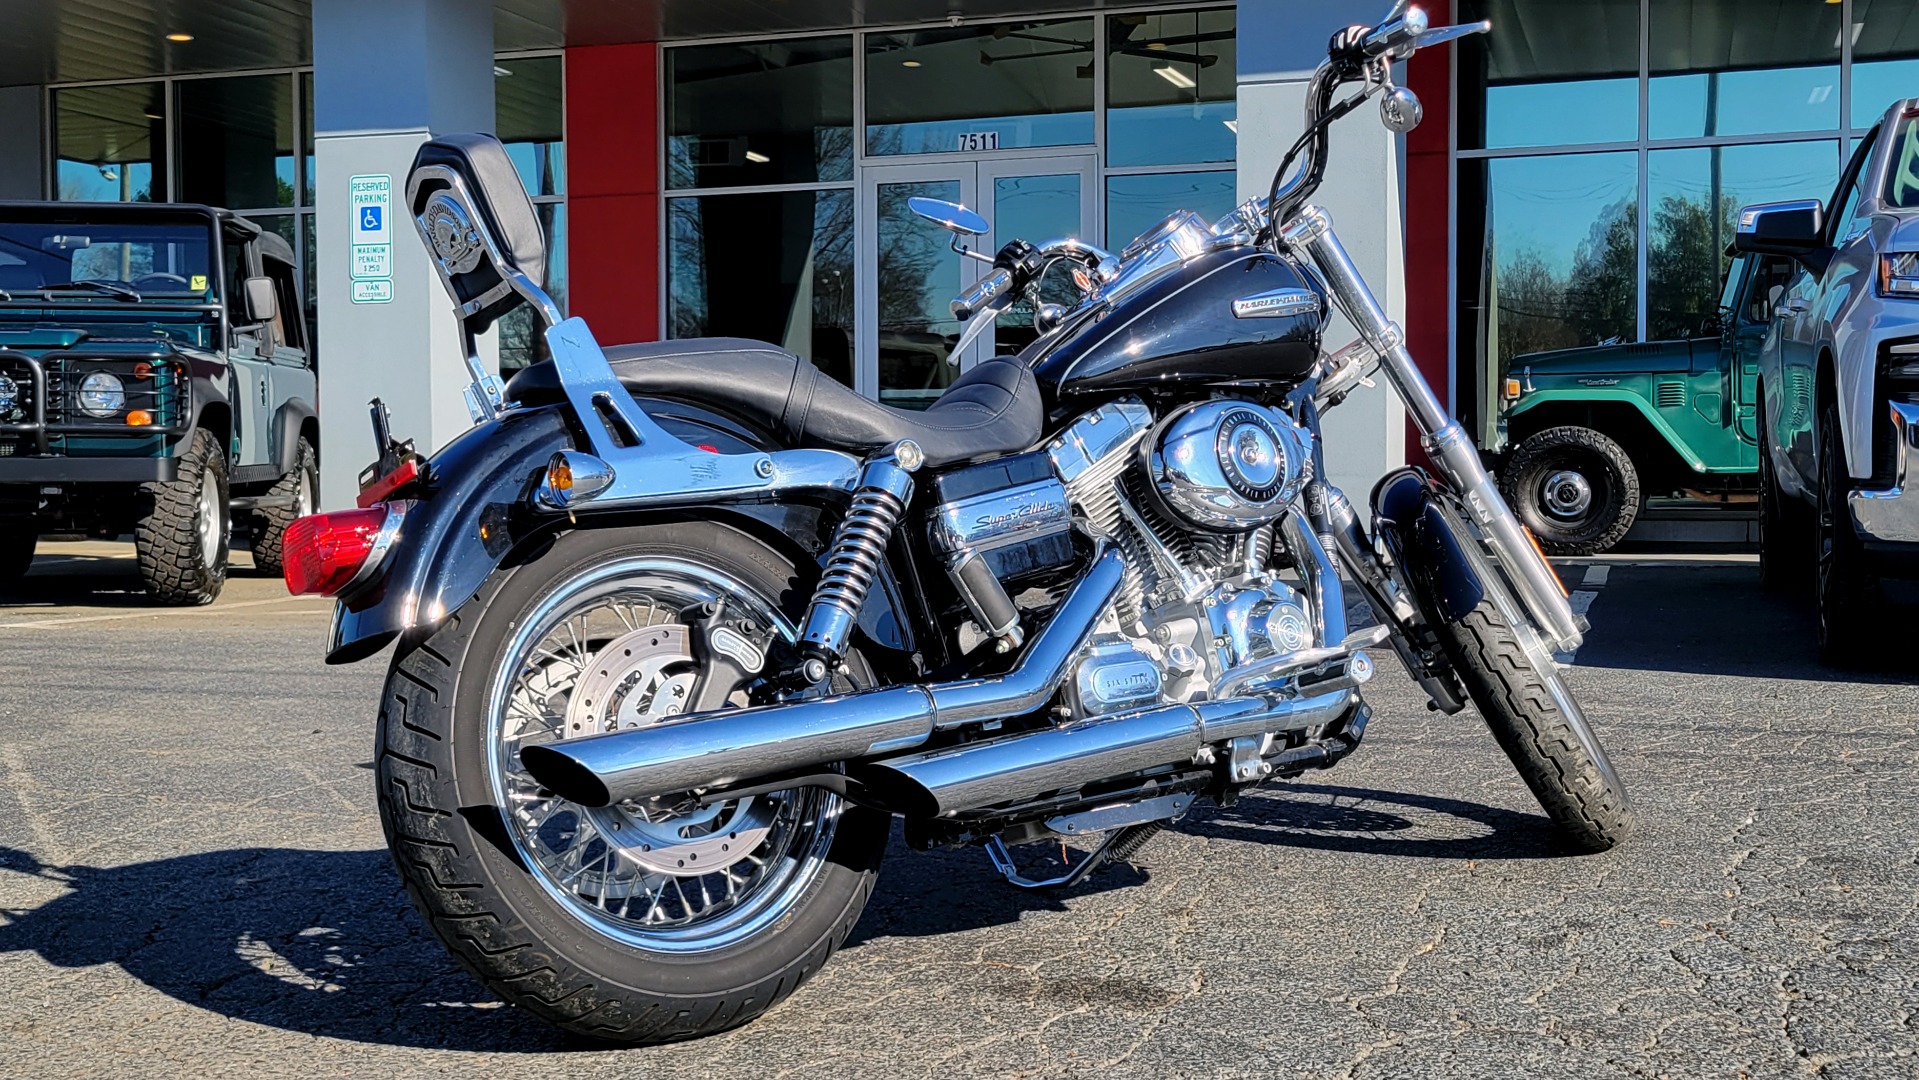 Used 2007 Harley Davidson SUPER GLIDE 1600CC / DYNA GLIDE / LOTS OF CHROME / ONLY 45 MILES for sale $14,000 at Formula Imports in Charlotte NC 28227 16